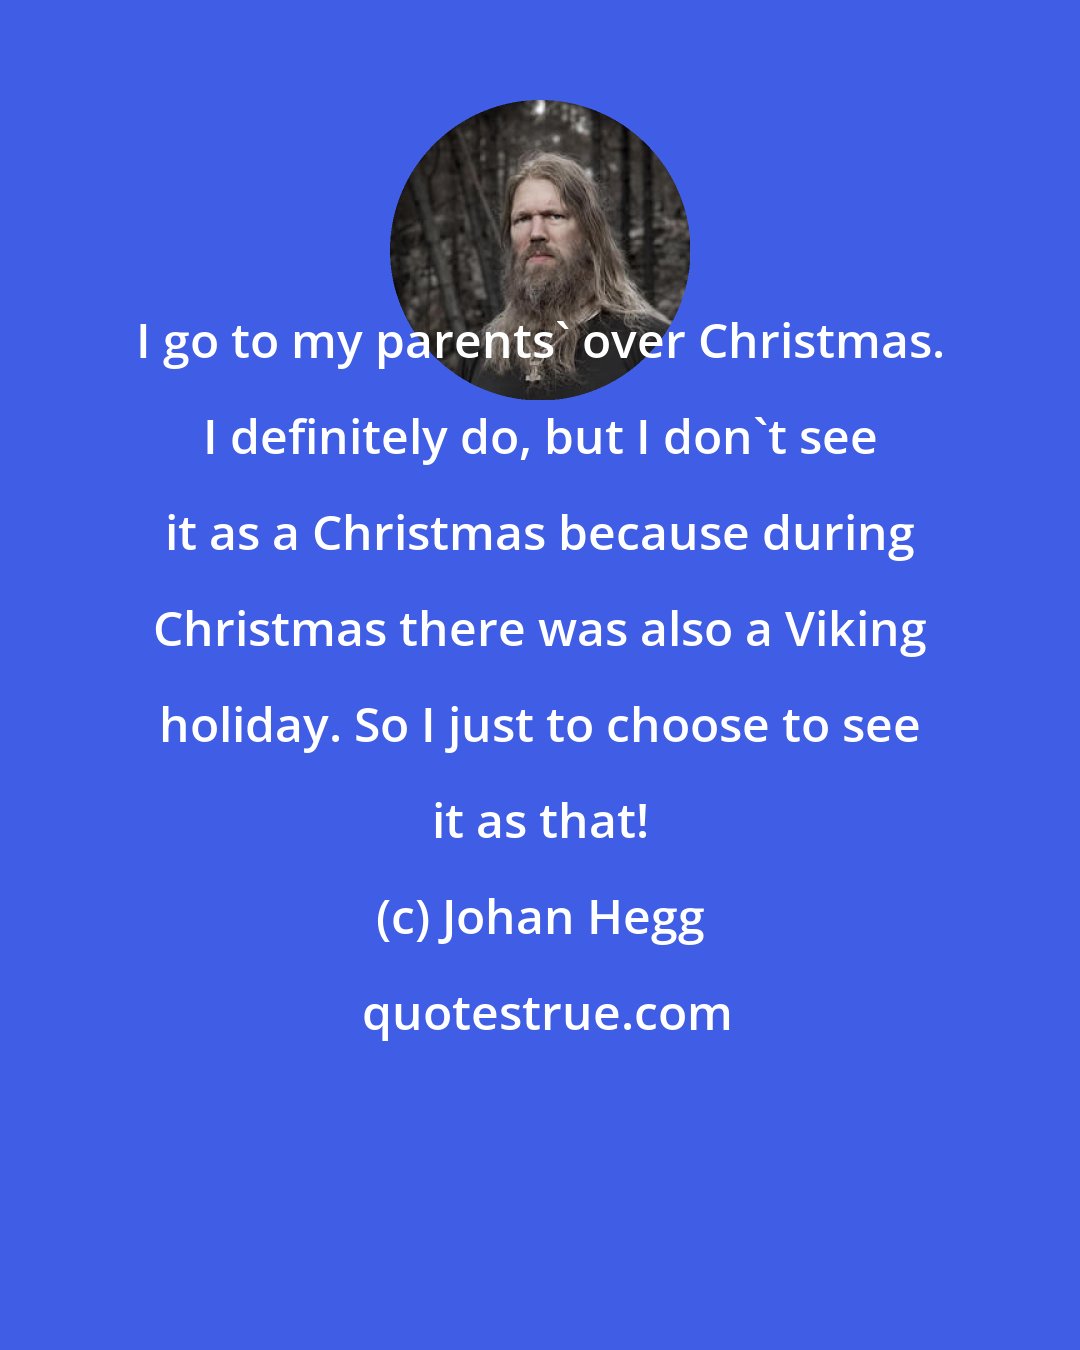 Johan Hegg: I go to my parents' over Christmas. I definitely do, but I don't see it as a Christmas because during Christmas there was also a Viking holiday. So I just to choose to see it as that!